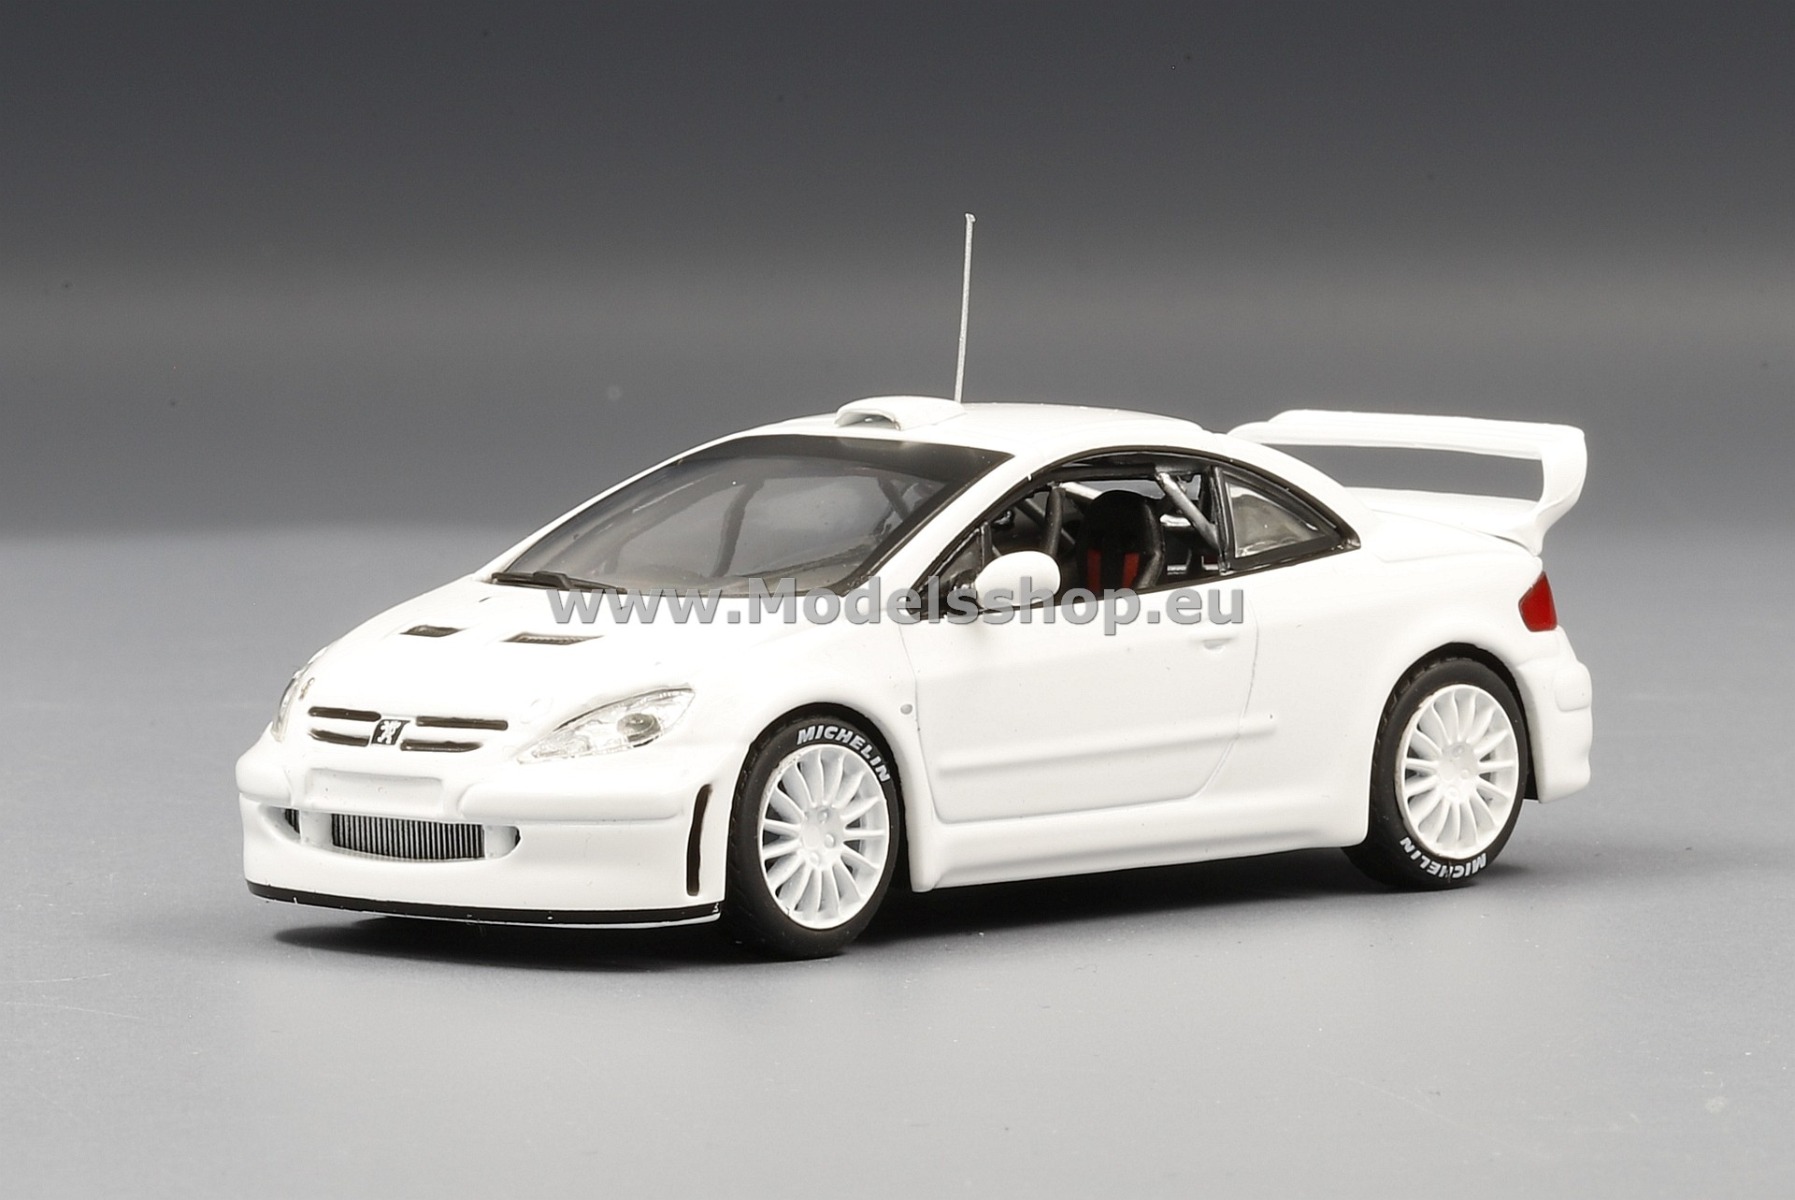 IXO MDCS030 Peugeot 307 WRC /white/ + 2 Set of Wheels and Tyres and Extra Rear Spoiler